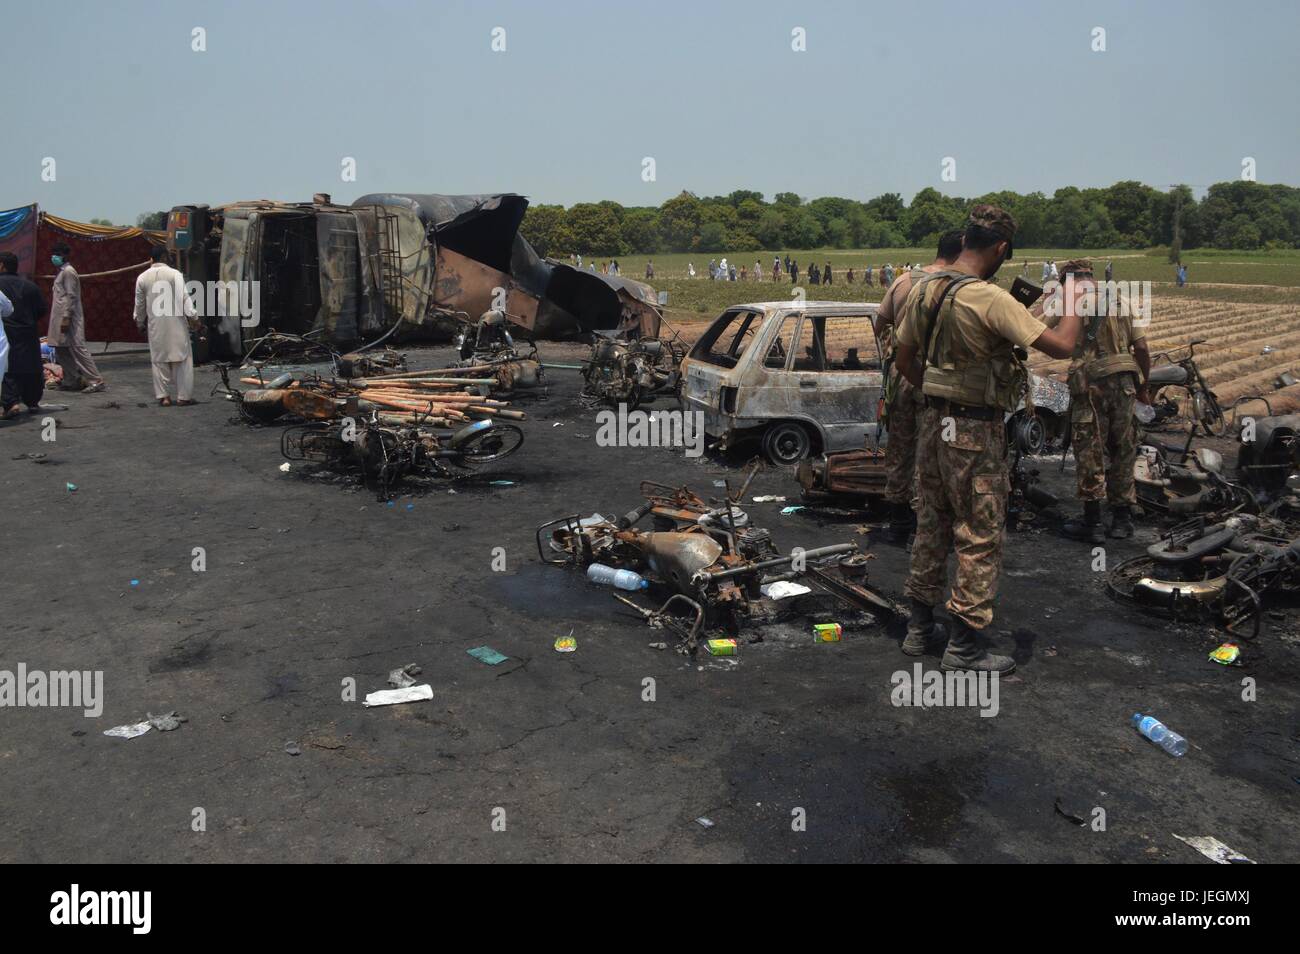 Bahawalpur. 25th June, 2017. Pakistani soldiers examine the oil tanker accident site in eastern Pakistan's Bawahalpur, on June 25, 2017. At least 140 people were killed and over 120 others injured in an oil tanker fire that happened in the Pakistan's eastern Punjab province on Sunday morning, said a local parliamentarian. Credit: Stringer/Xinhua/Alamy Live News Stock Photo